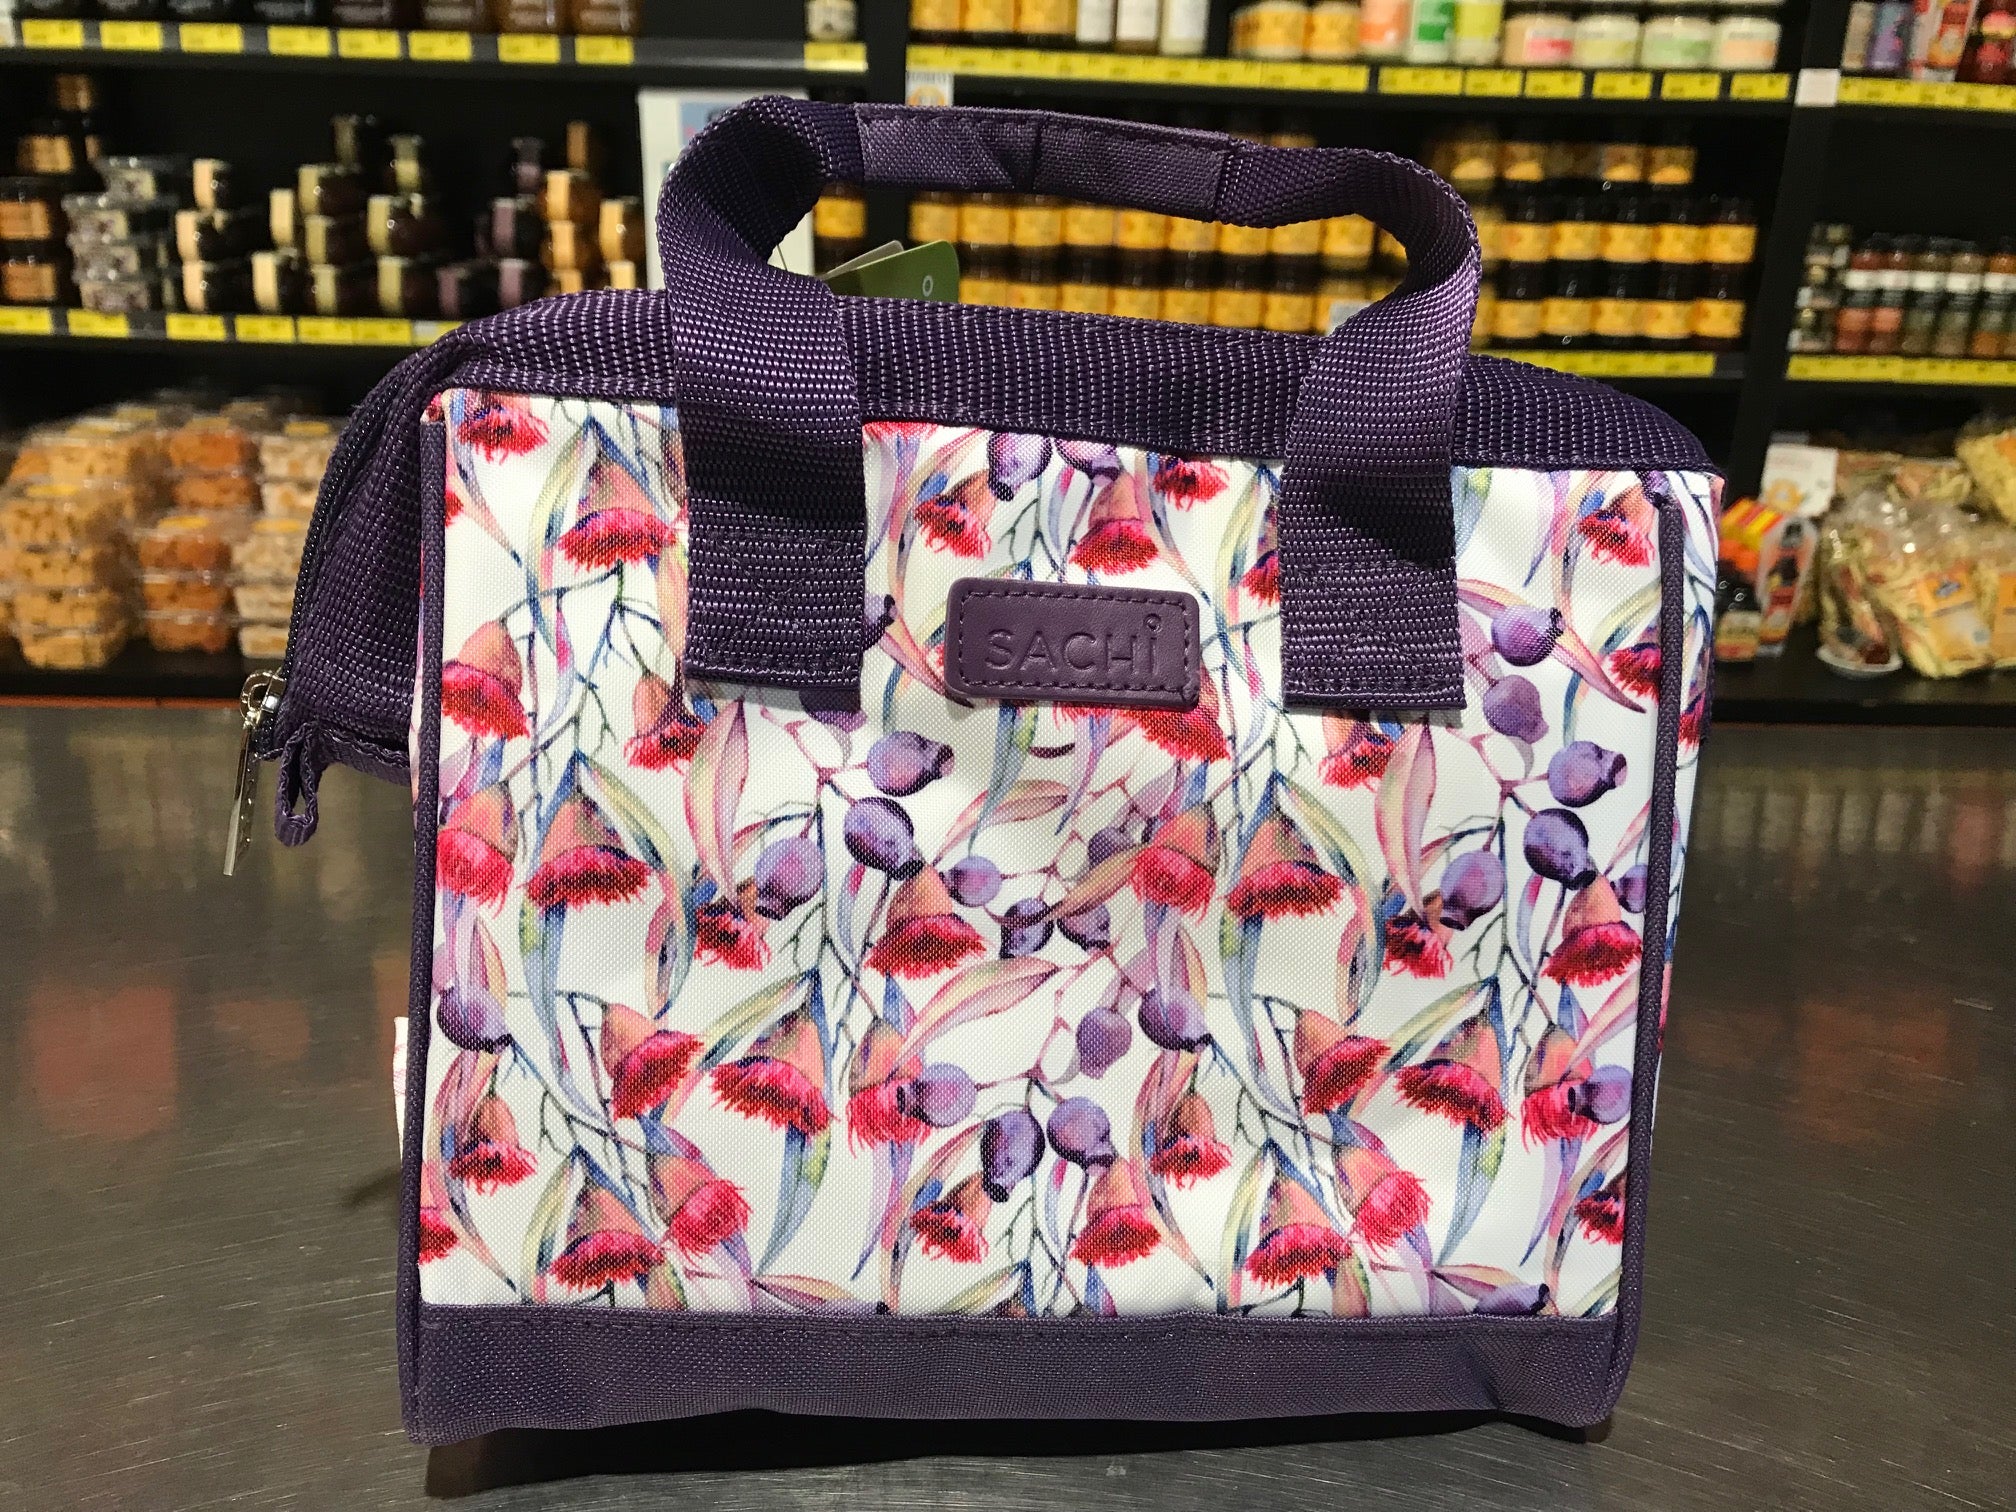 Sachi Insulated Lunch Bag - Gumnuts - $29.99 including GST